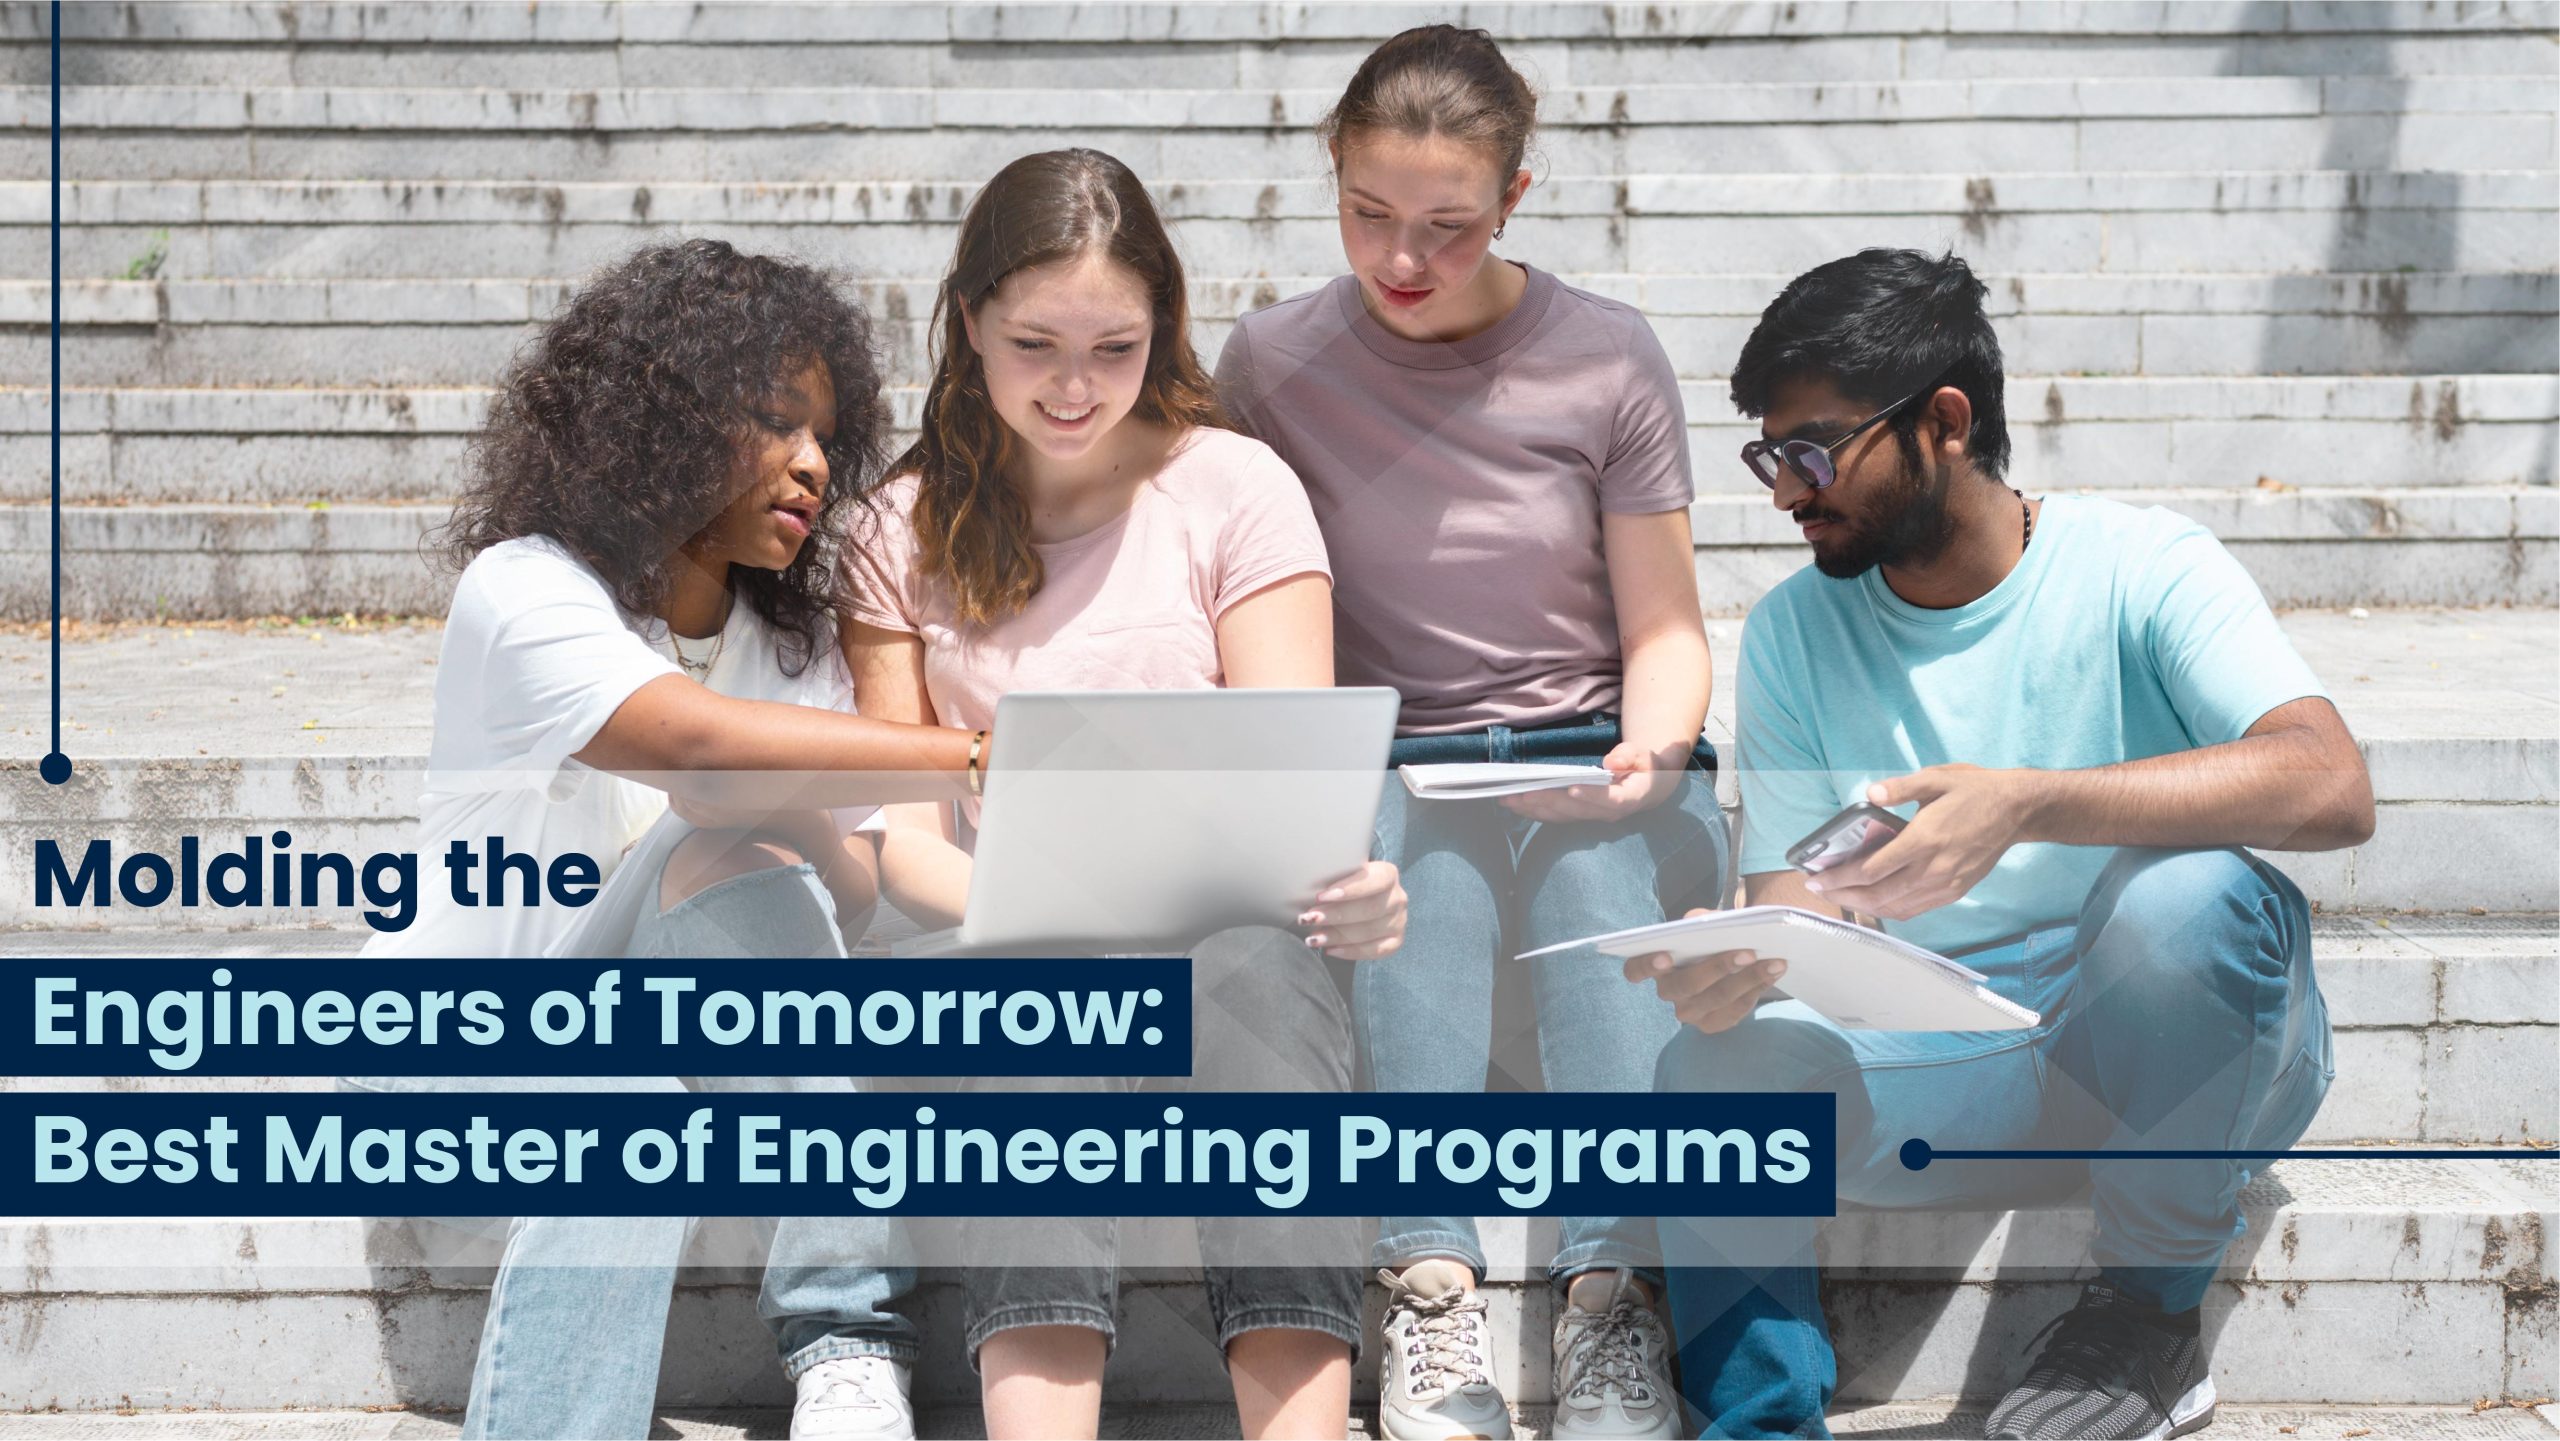 MOLDING THE ENGINEERS OF TOMORROW: BEST MASTER  OF ENGINEERING PROGRAMS